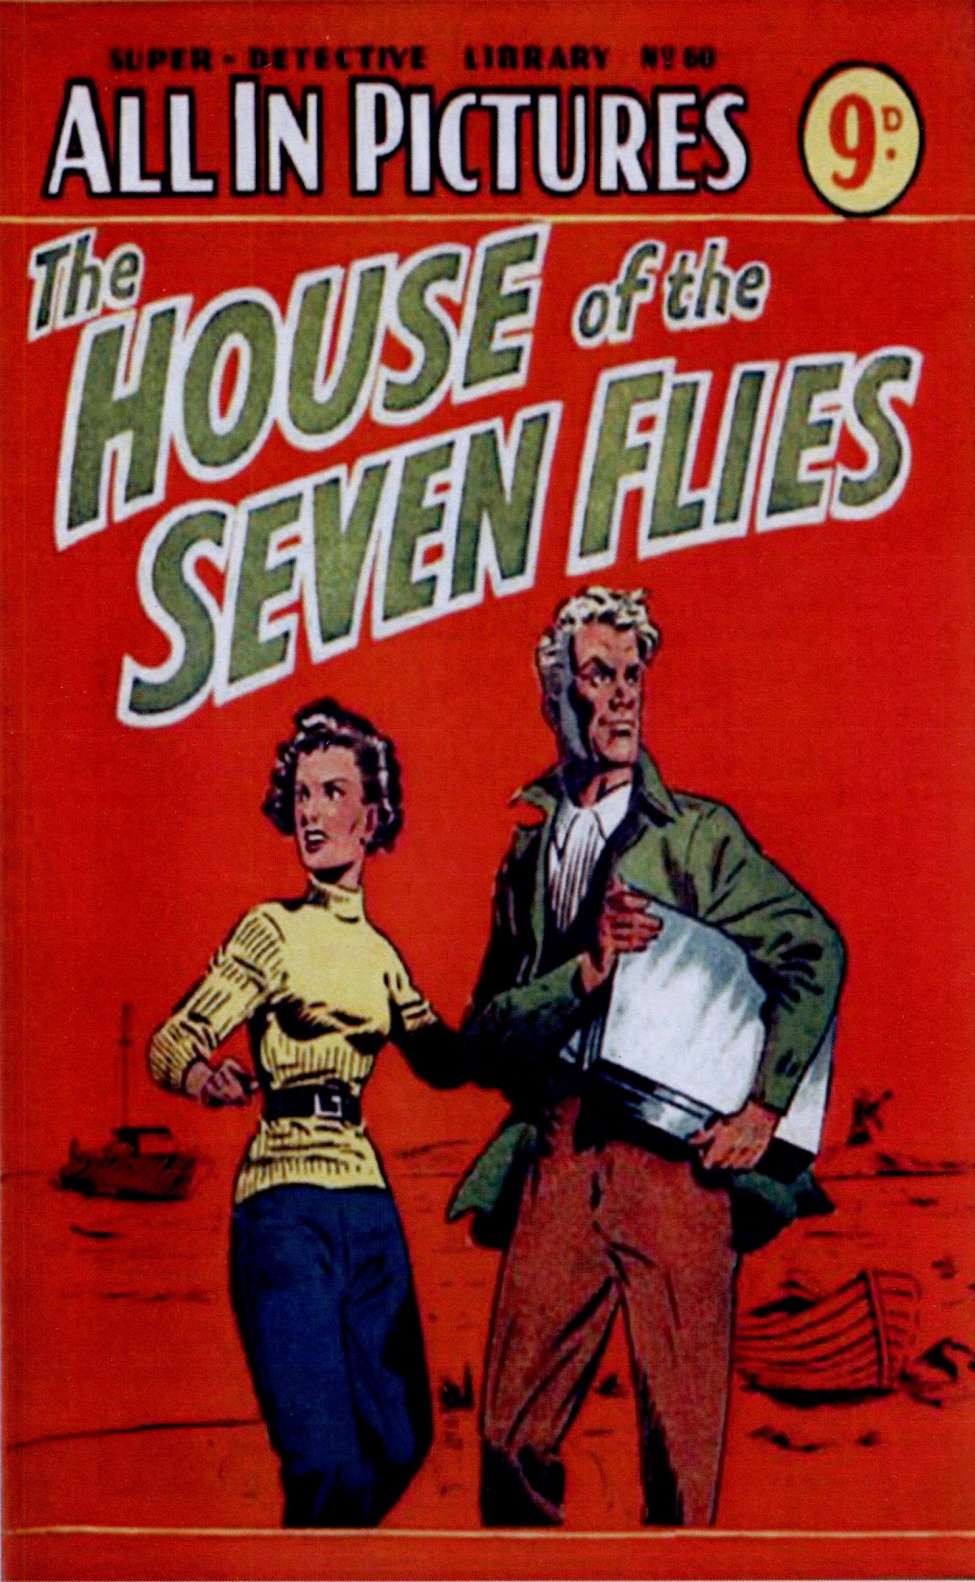 Book Cover For Super Detective Library 60 - The House of the Seven Flies